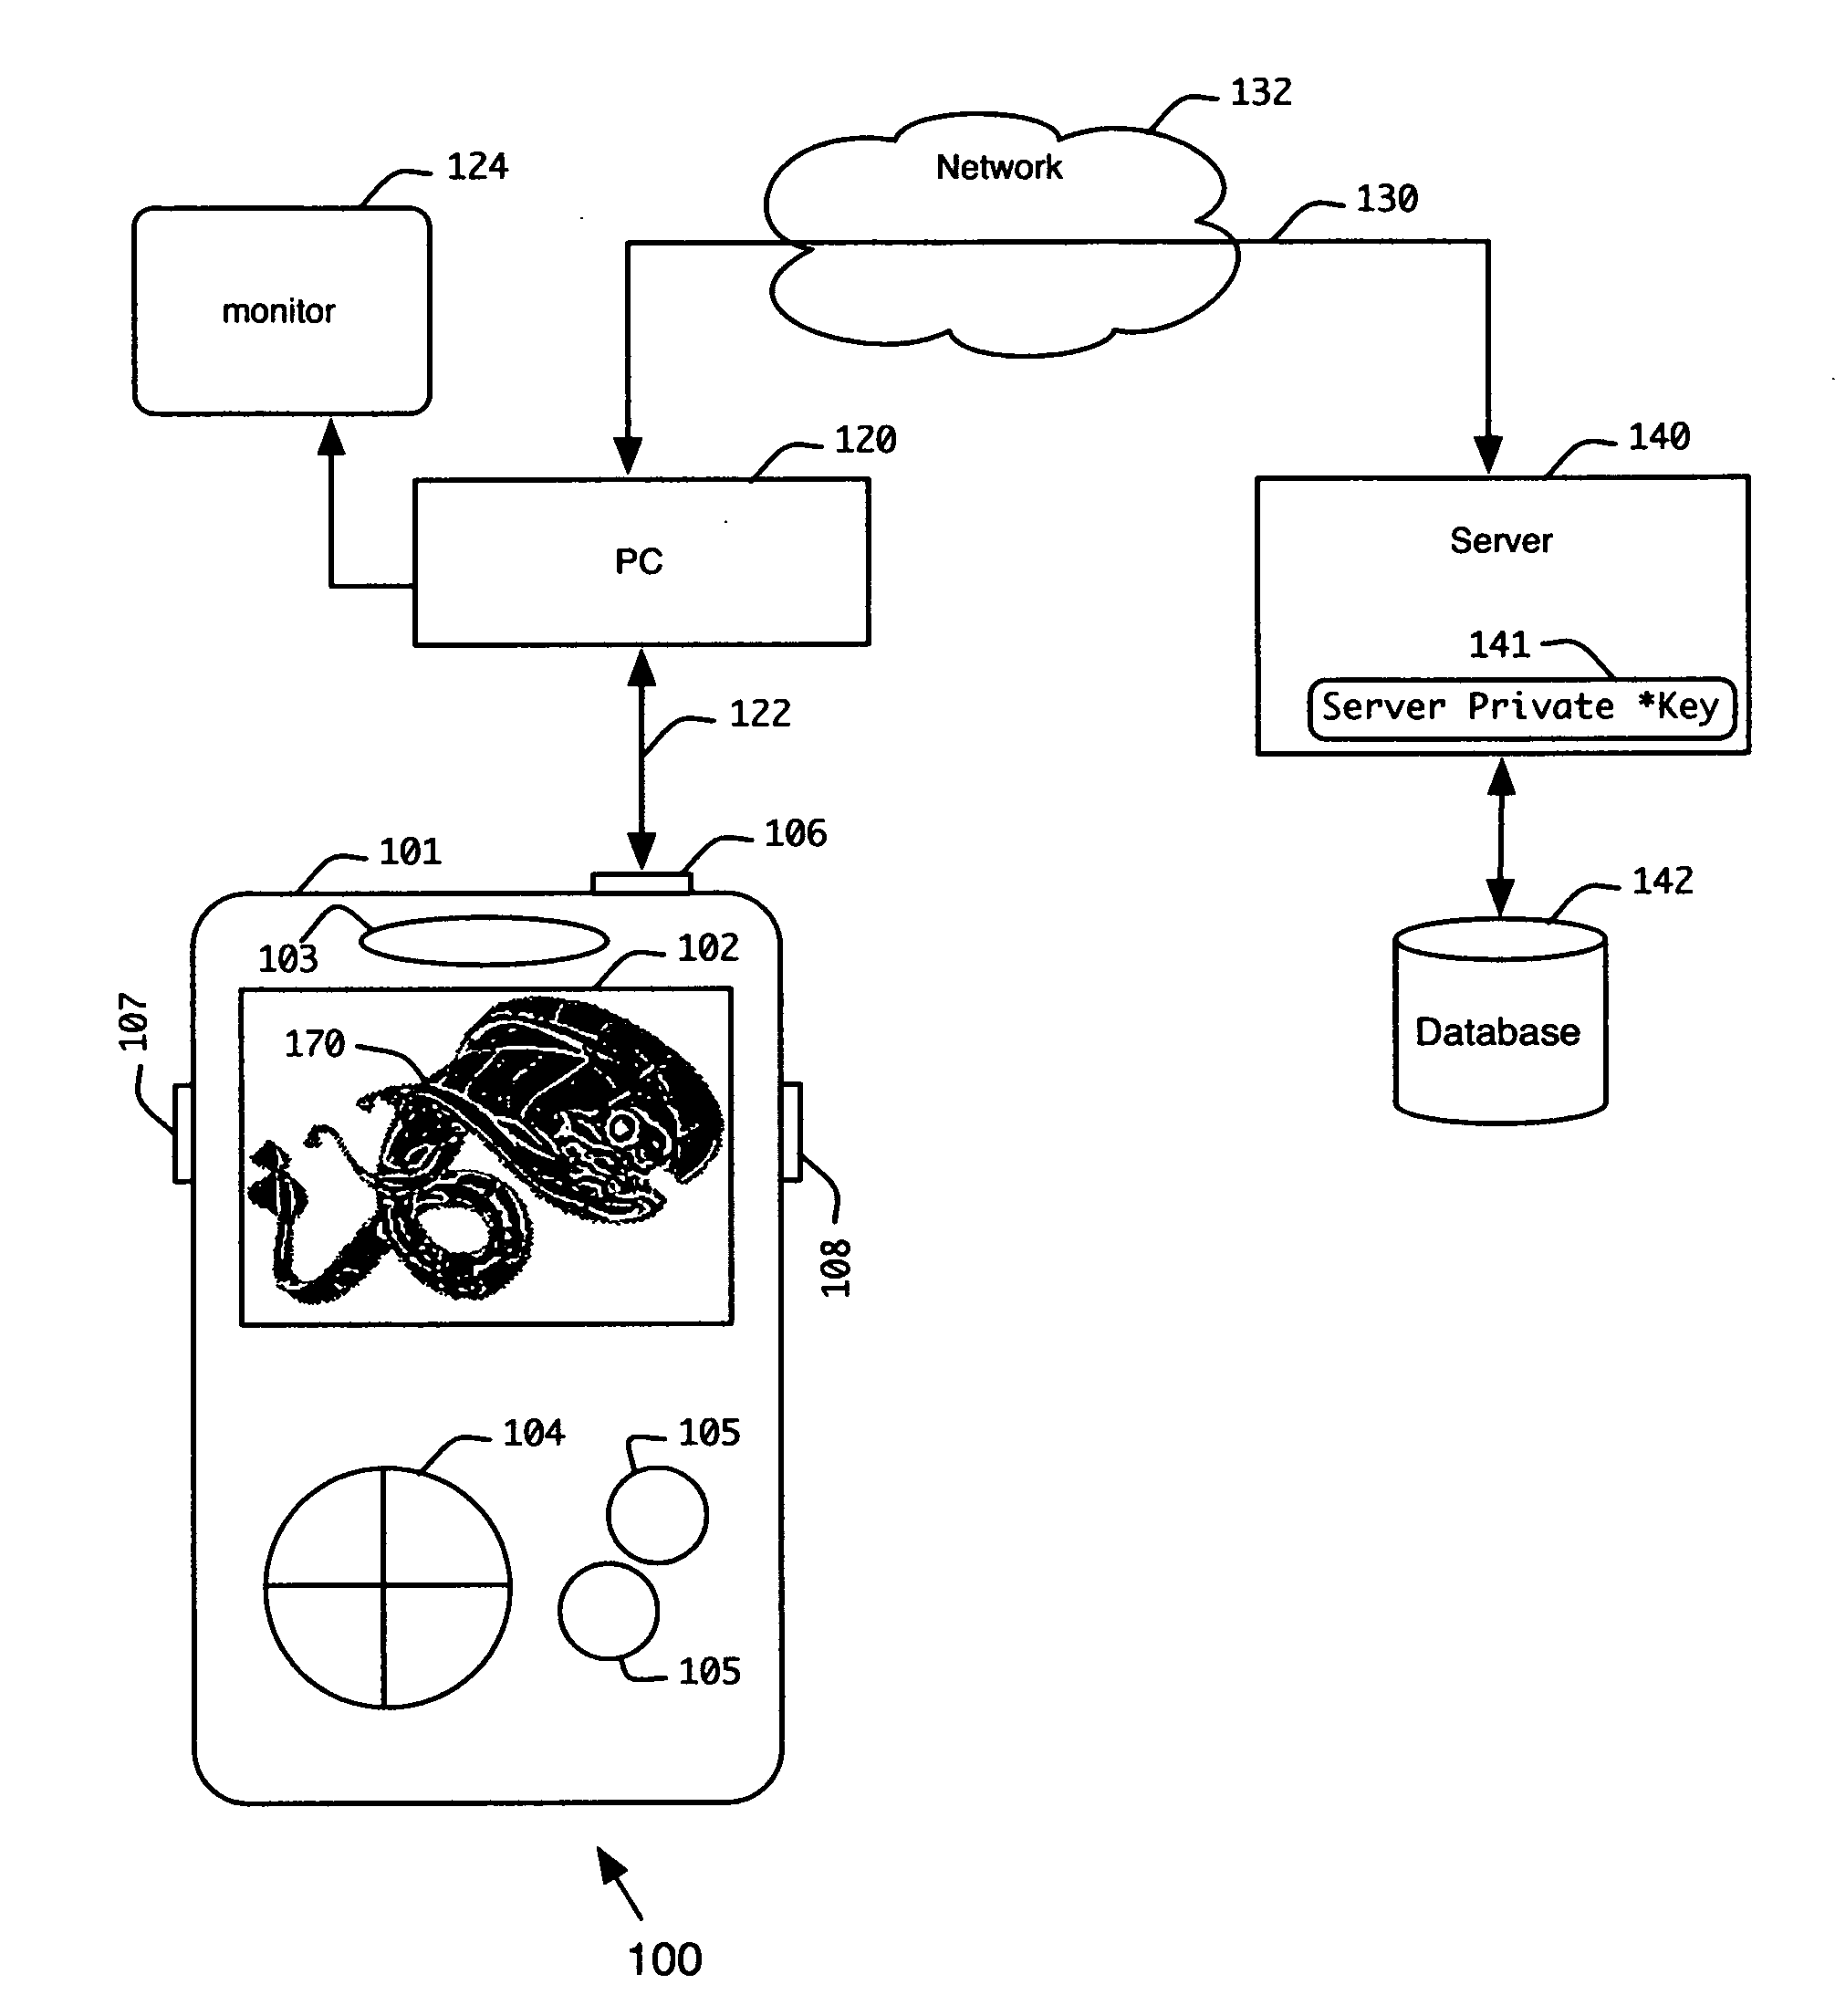 Multiplayer handheld computer game system having tiled display and method of use